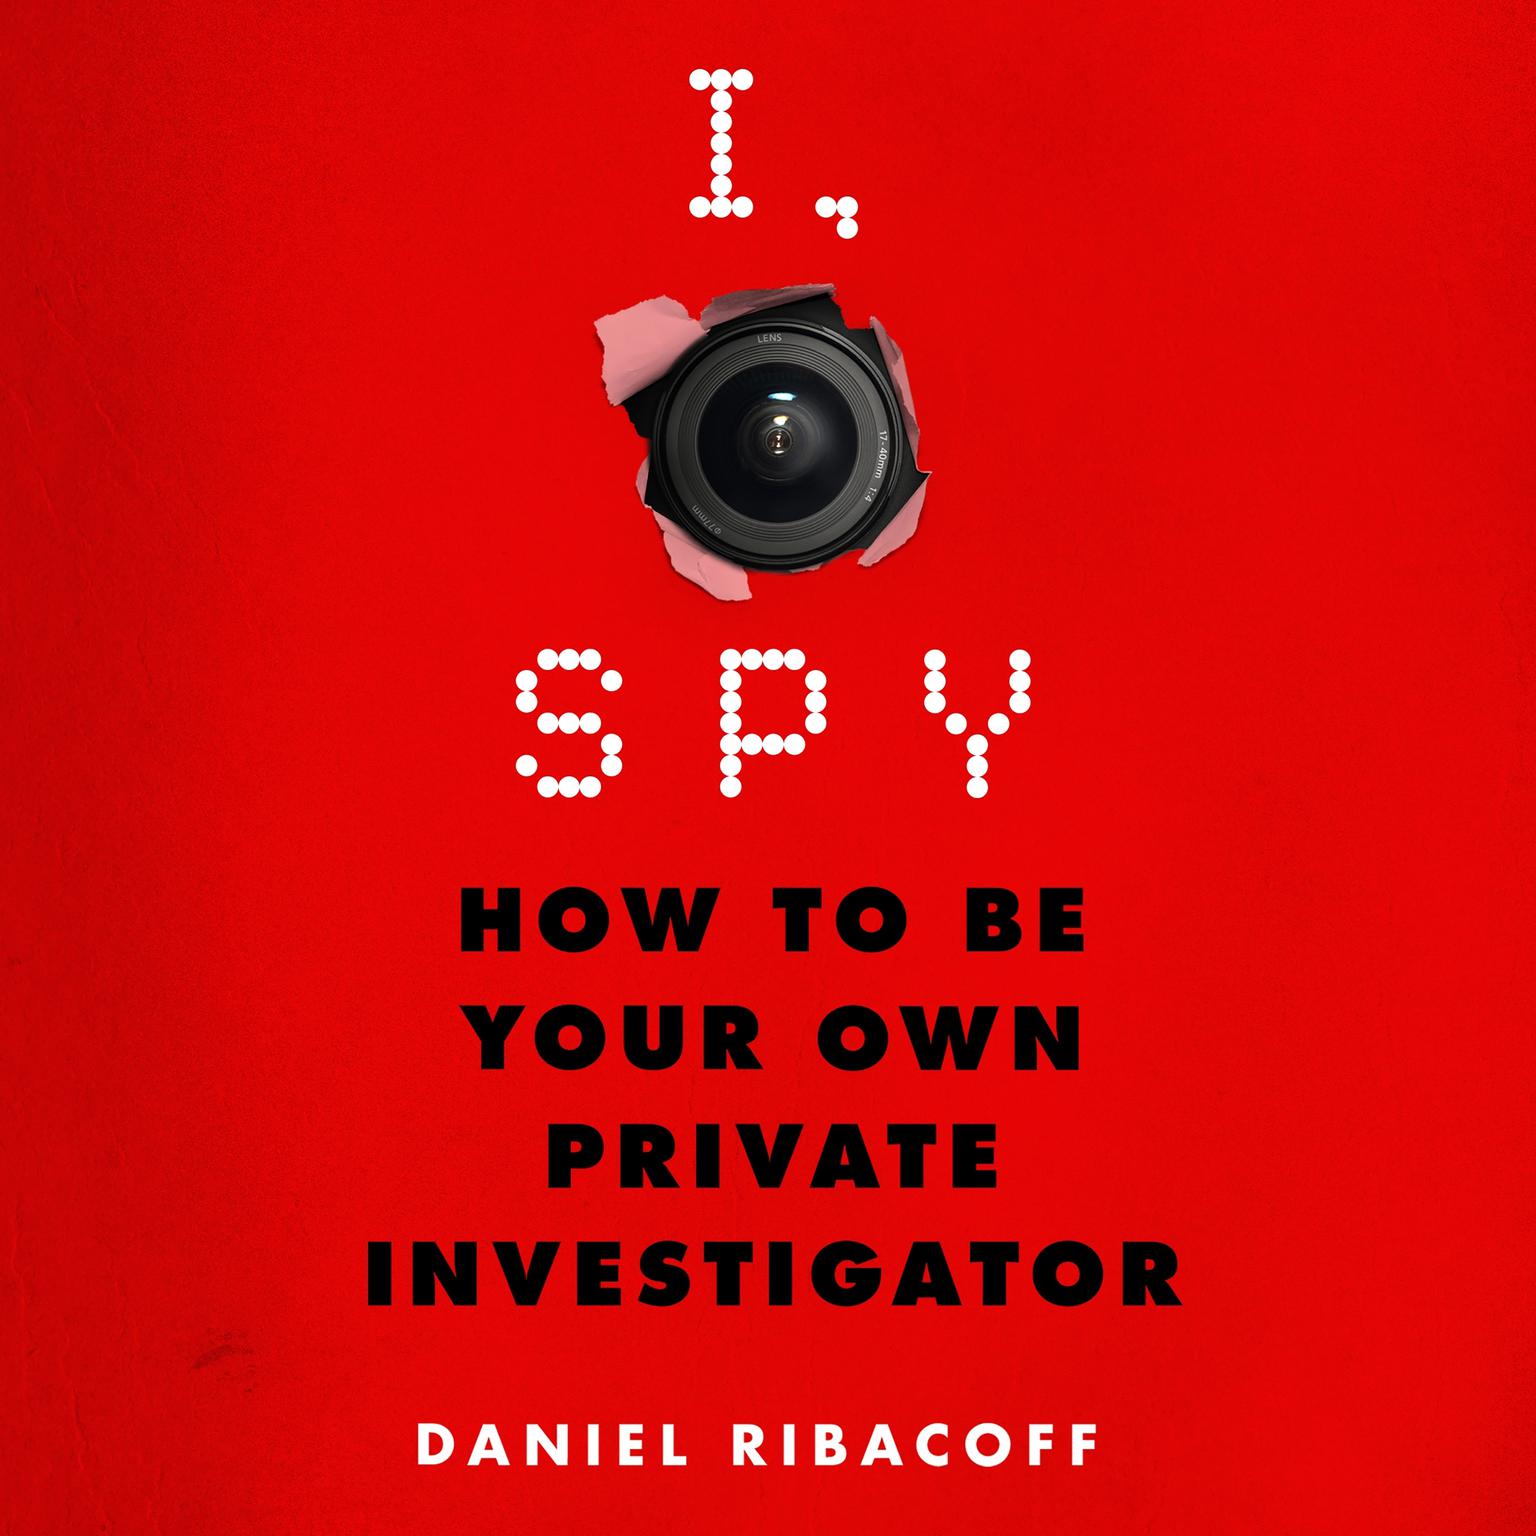 I, Spy: How to Be Your Own Private Investigator Audiobook, by Dina Santorelli